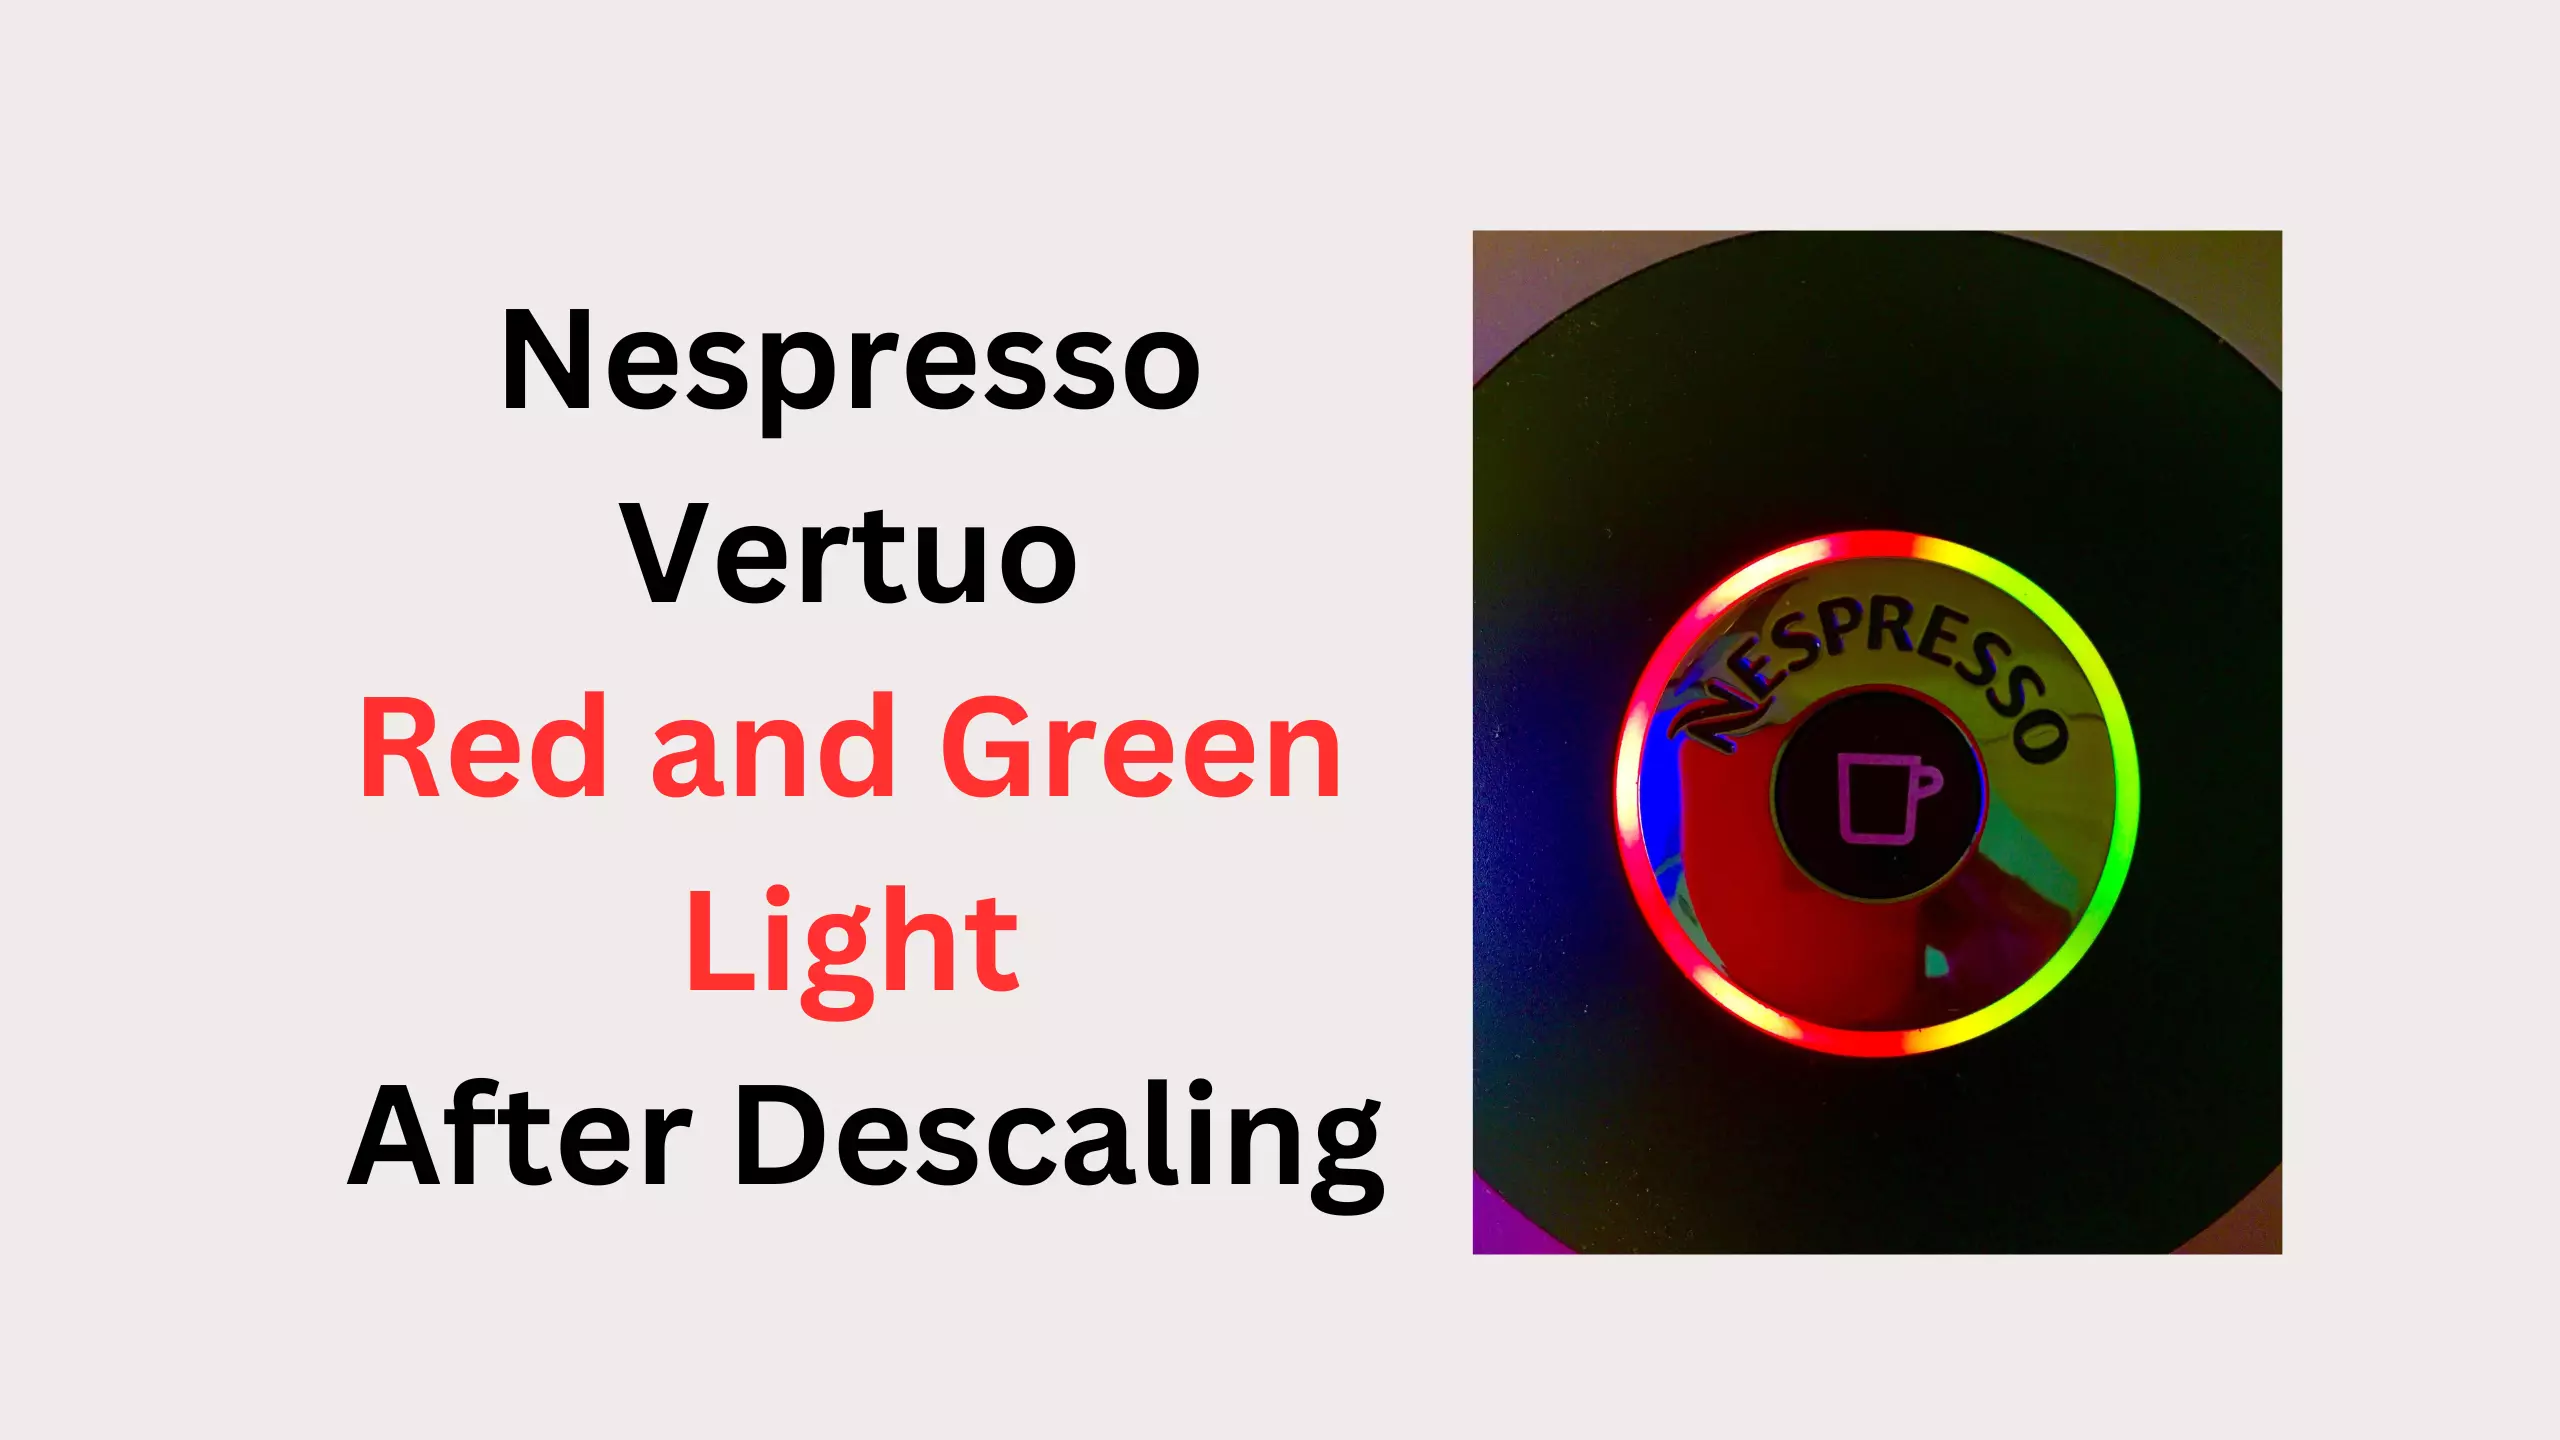 nespresso vertuo red and green light after descaling